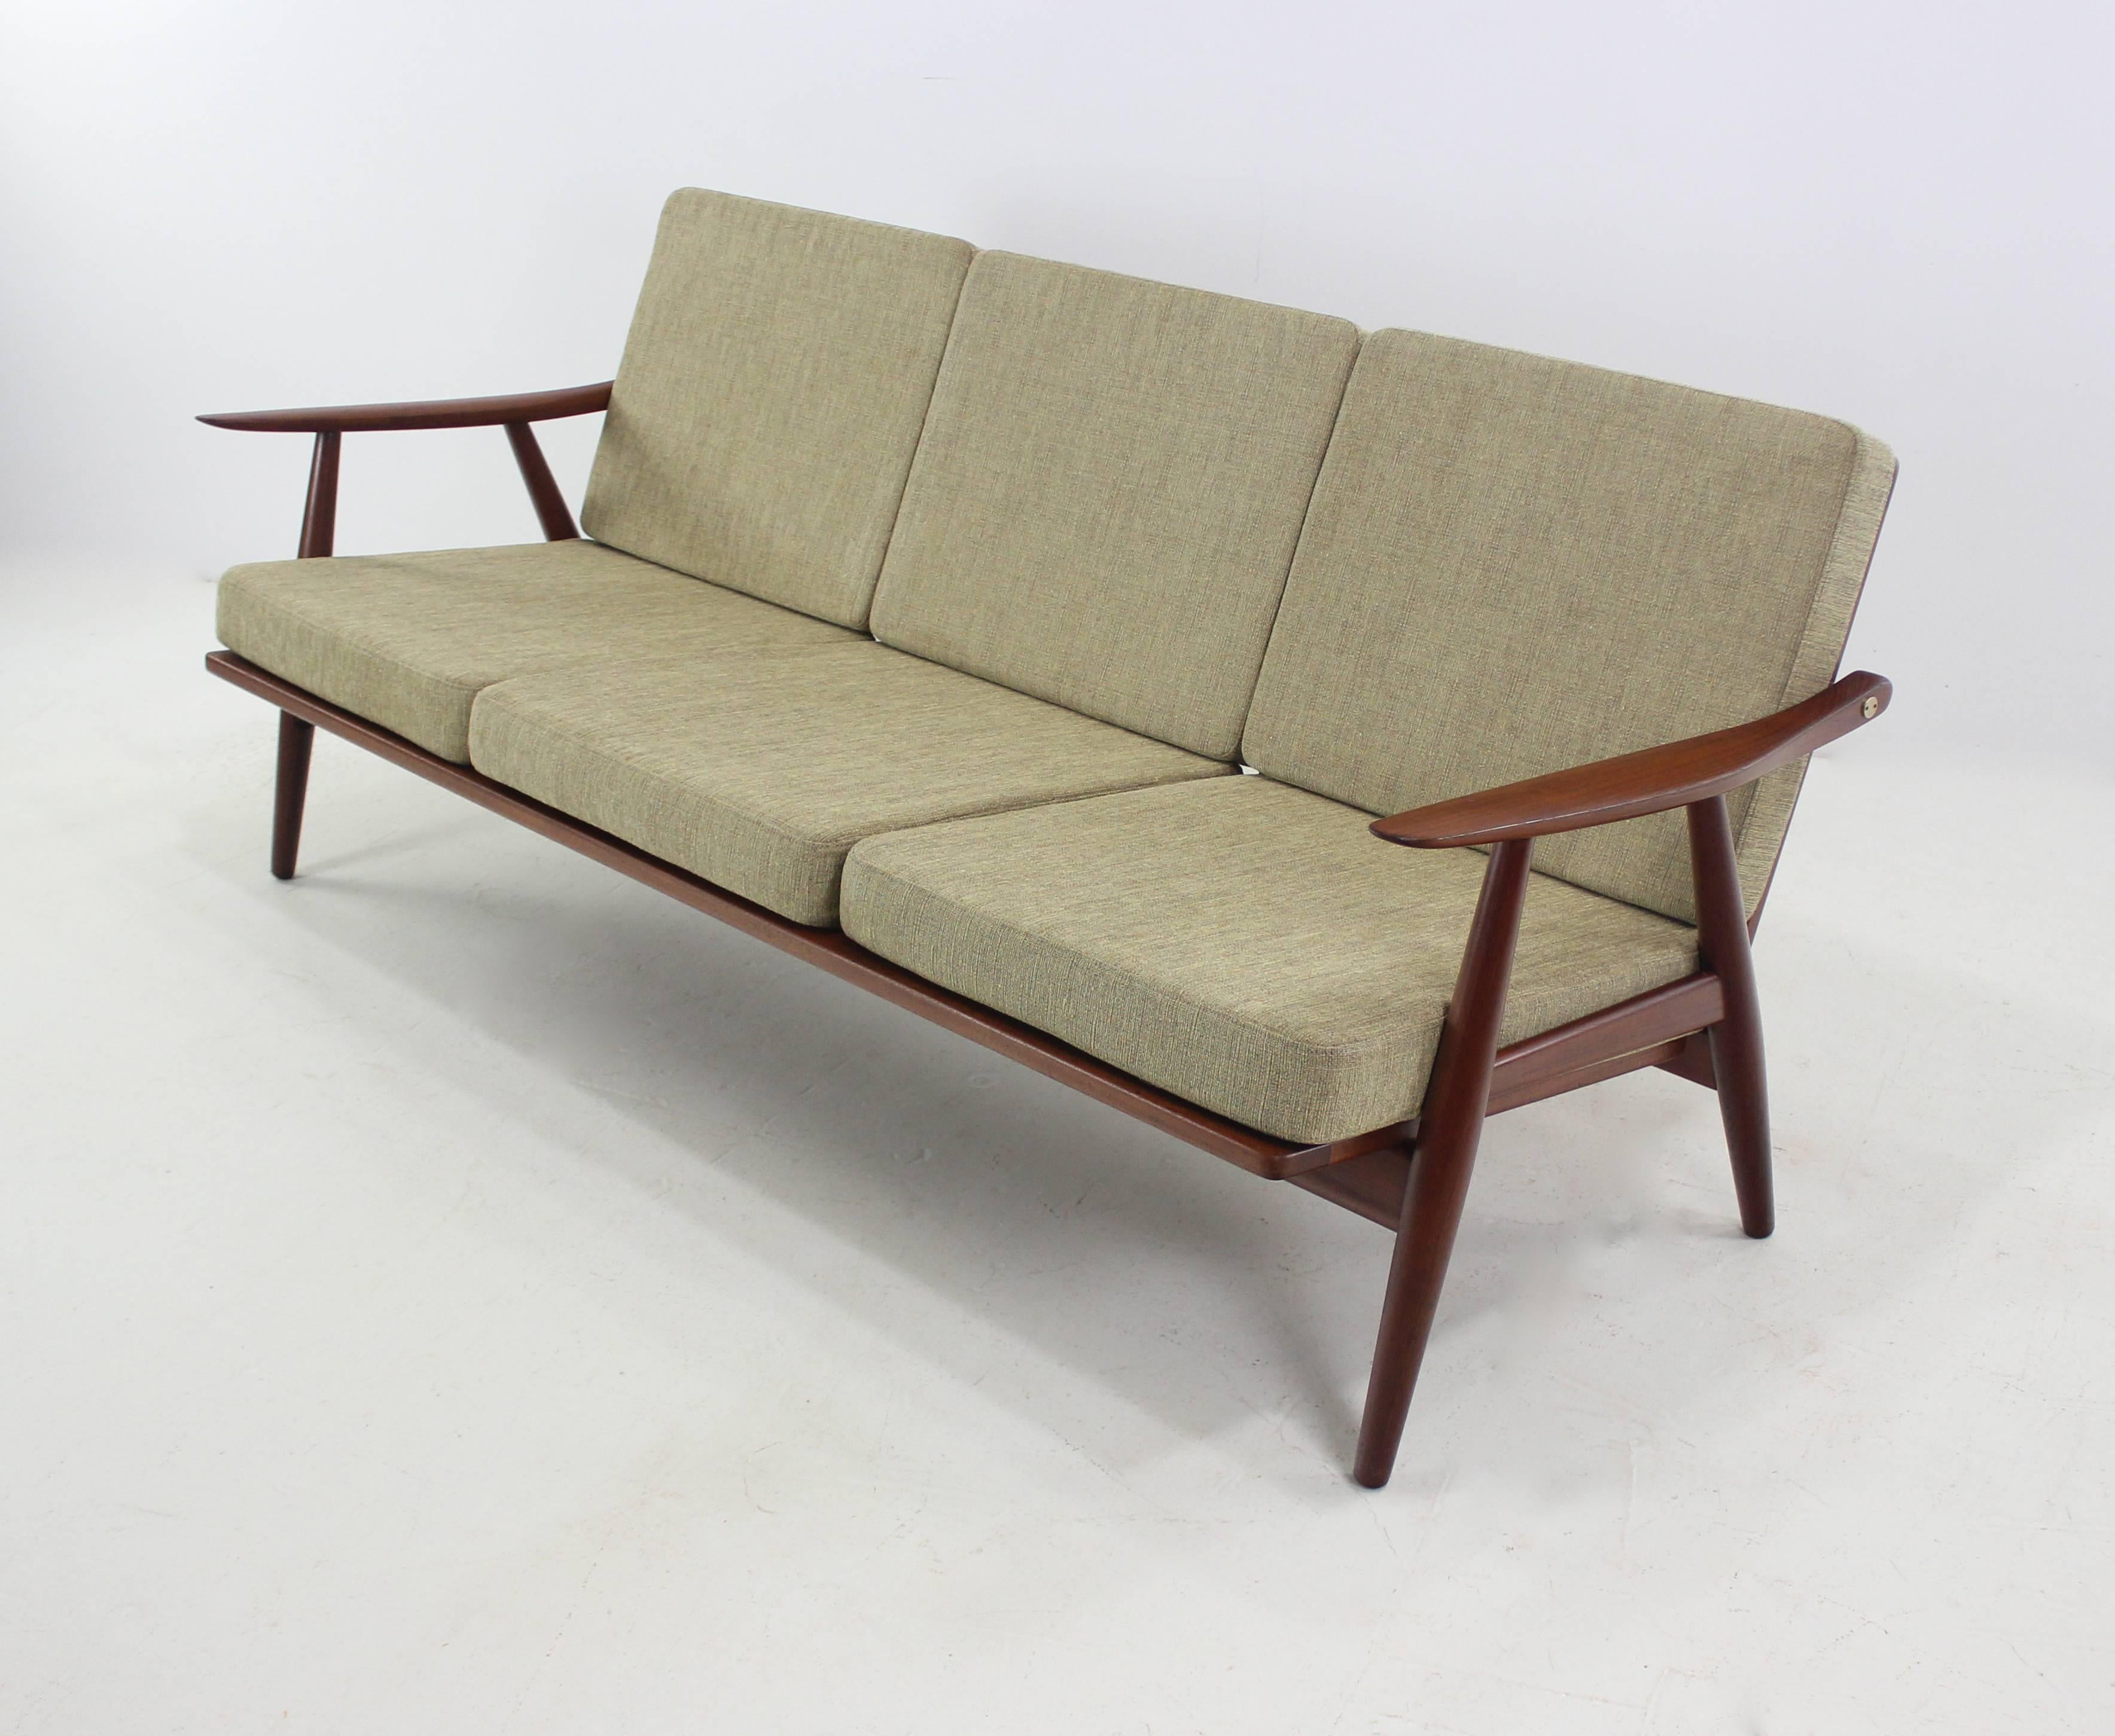 Rare Danish modern sofa designed by Hans Wegner, circa 1954.
GETAMA, maker.
Model #GE-70.
Teak frame with brass hardware.
Newly upholstered in highest quality period fabric.
Pair of matching chairs to be listed separately.
Professionally